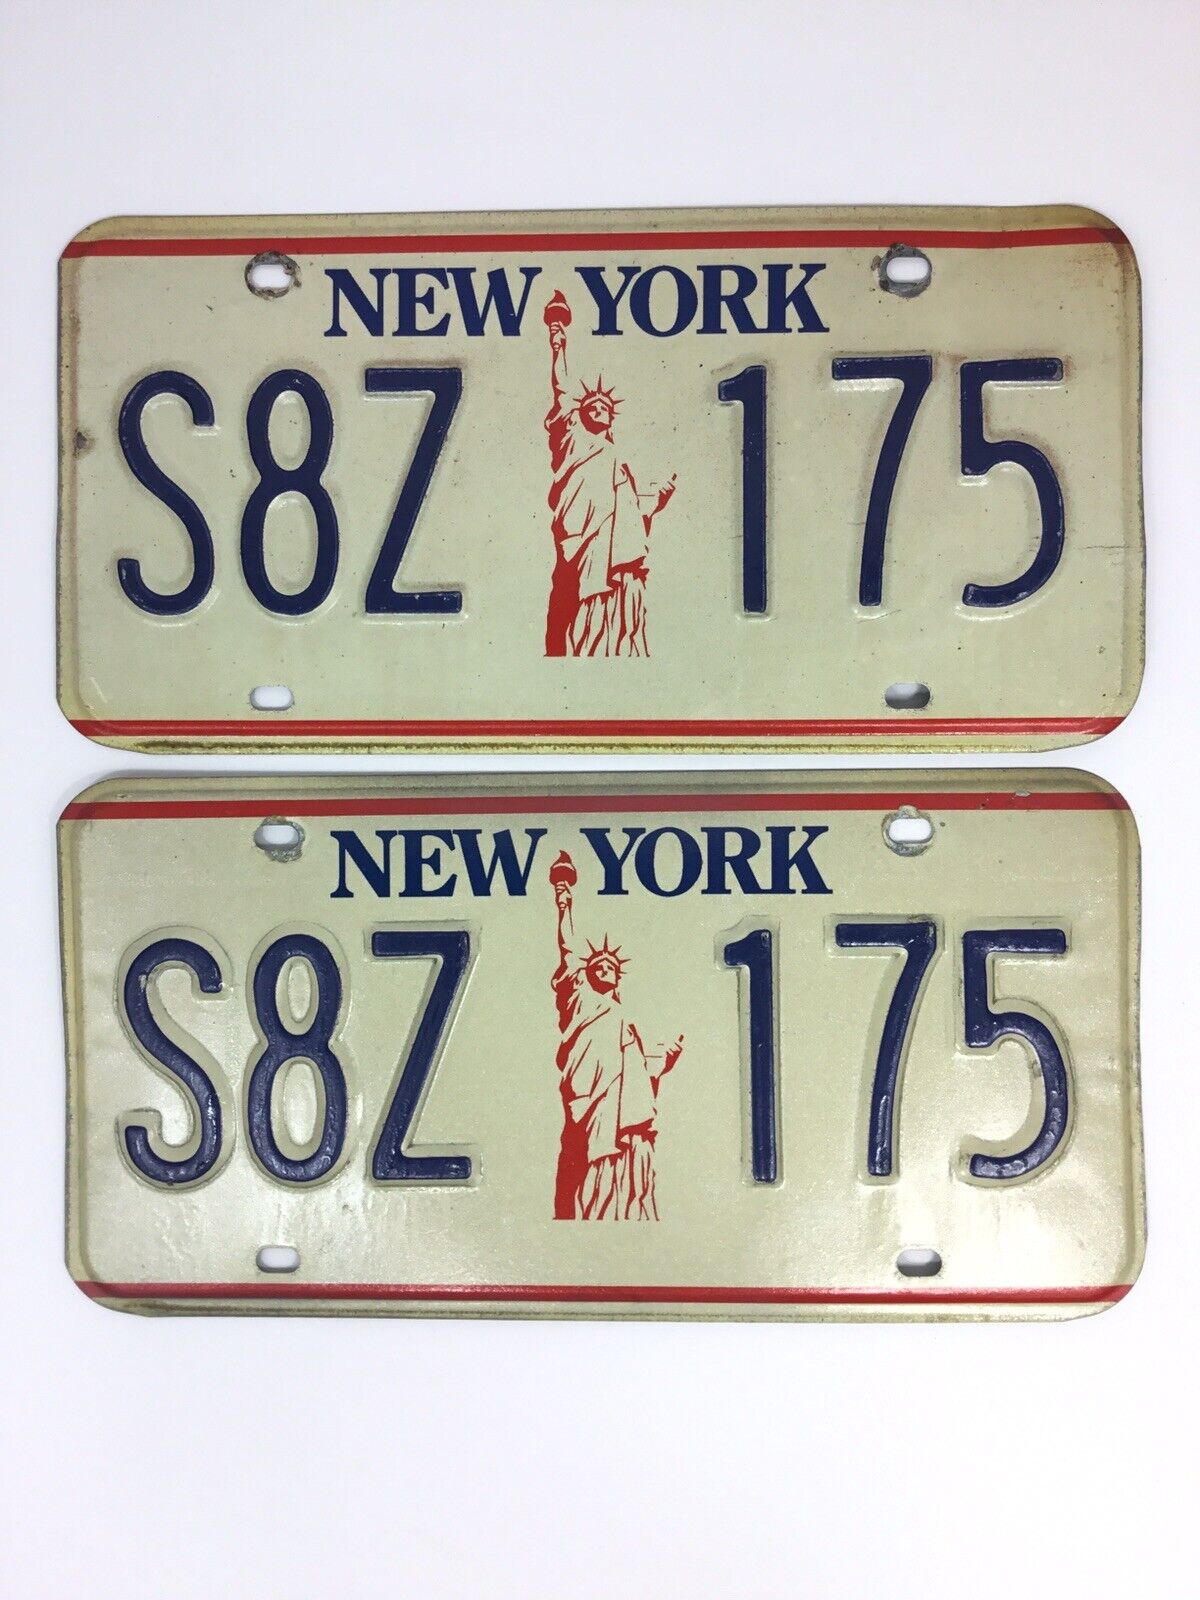 EXPIRED NEW YORK LICENSE PLATE LOT OF 2 S8Z-175 1986-2000